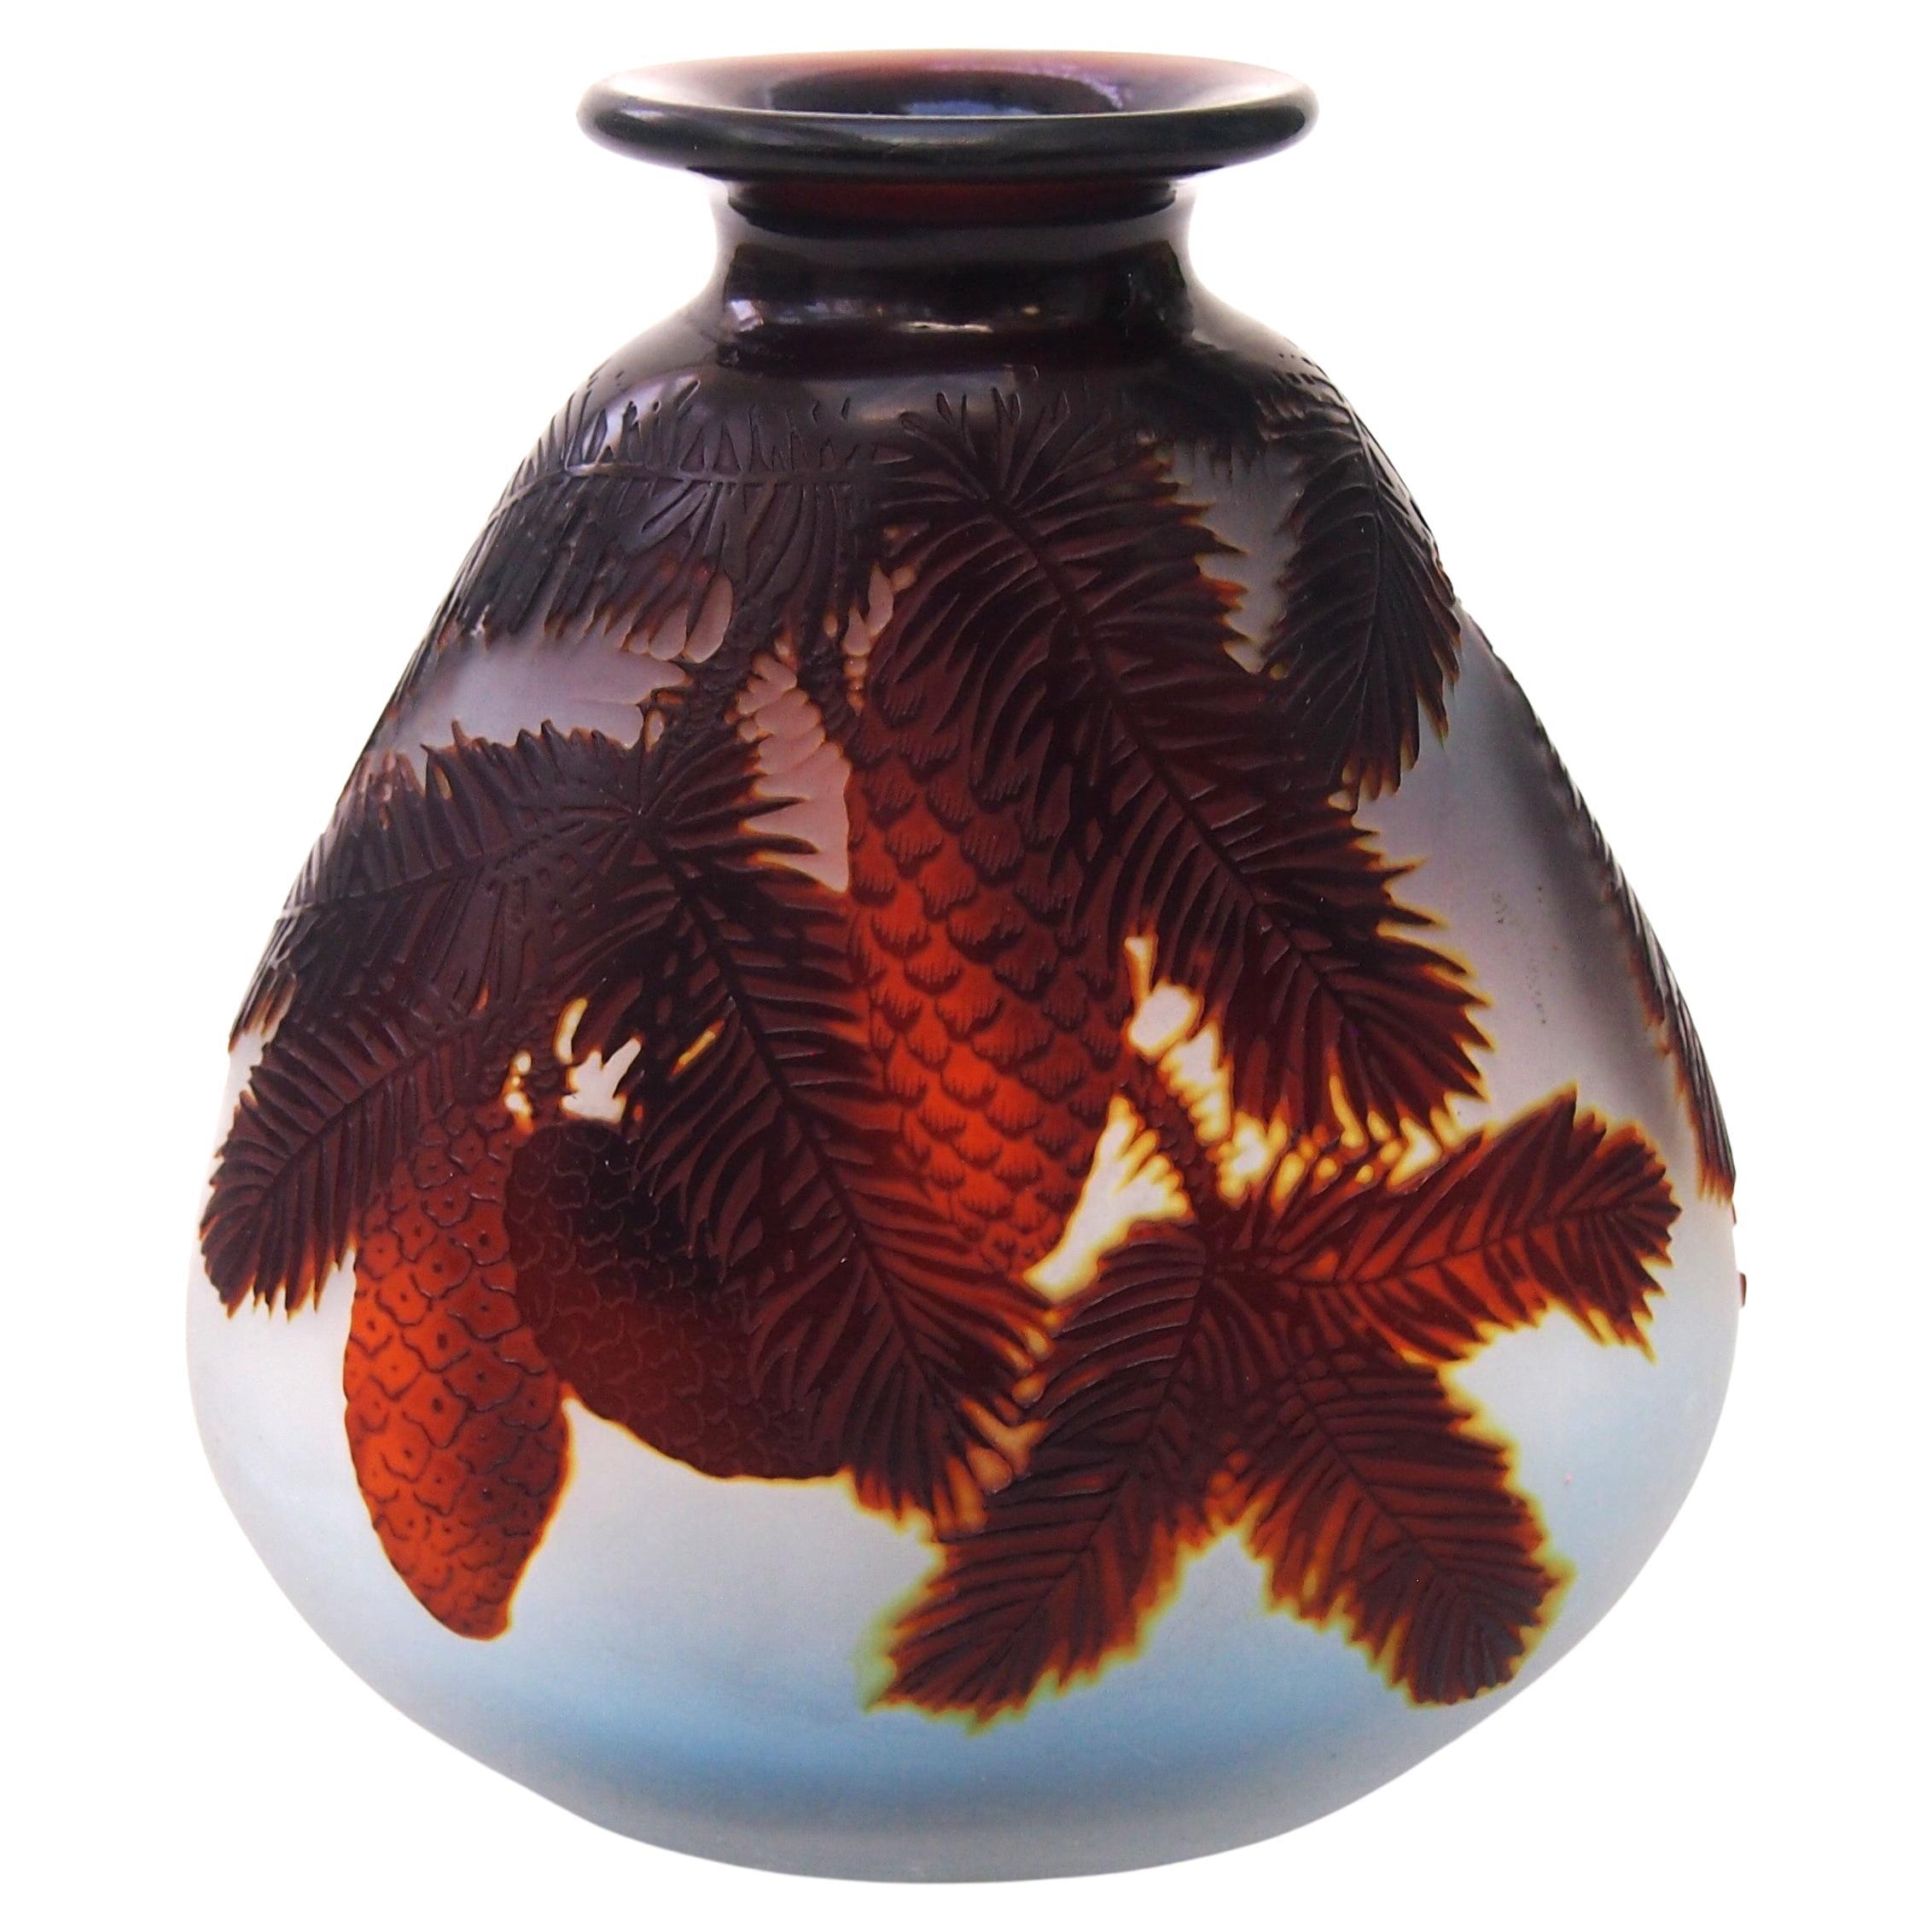 Fabulous Triangular Emile Galle in blue and brown cameo vase with fircones c1925 For Sale